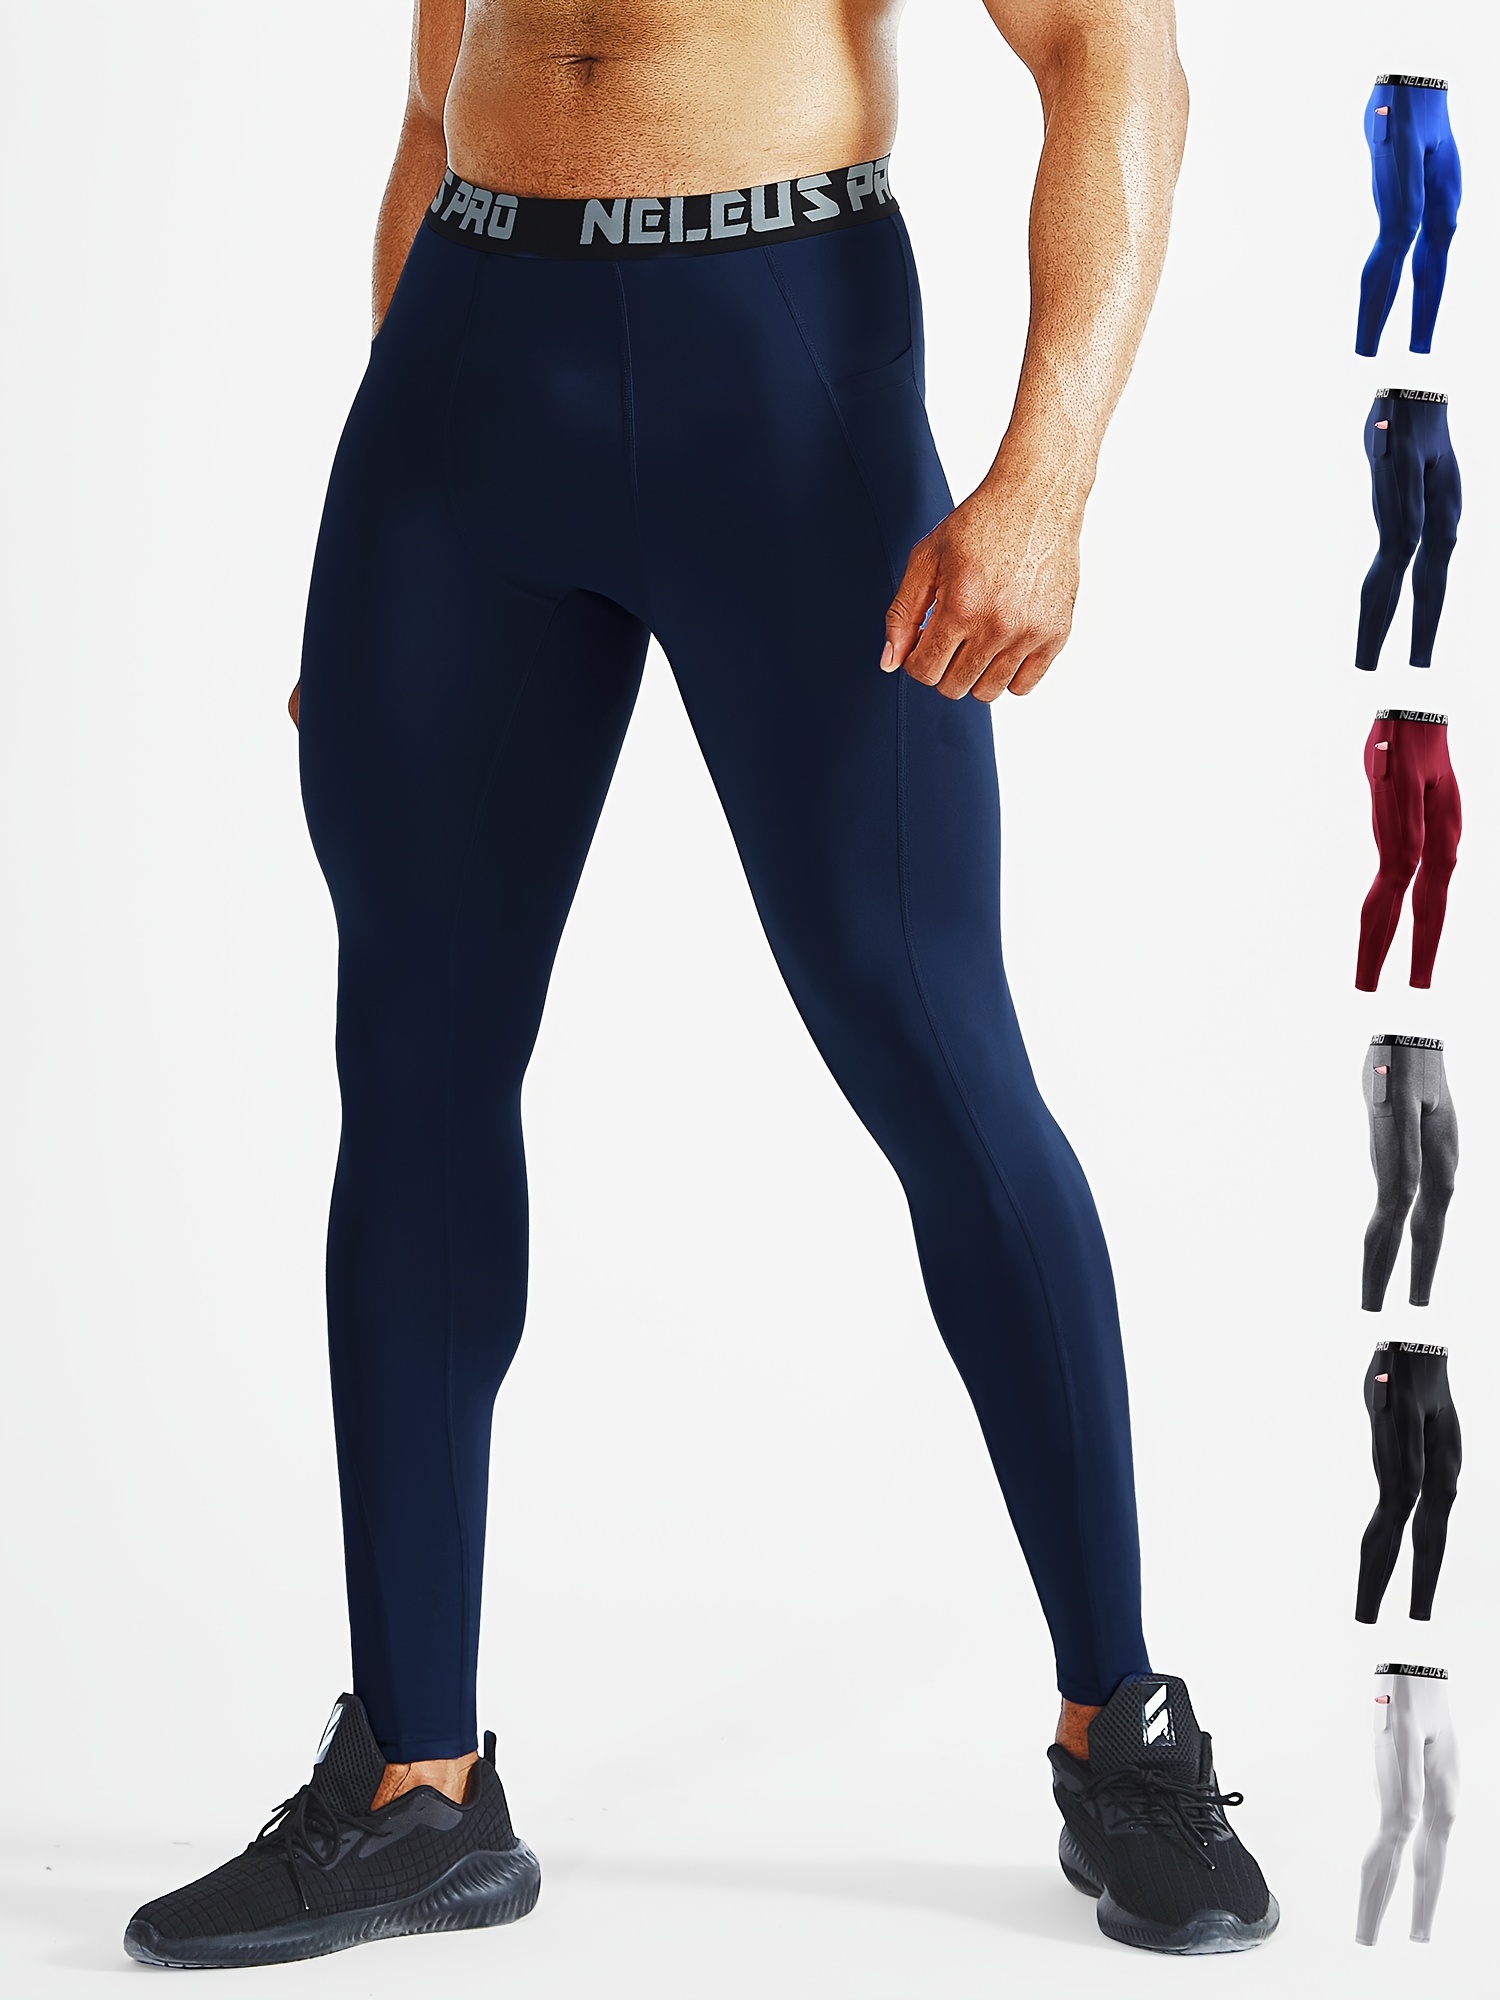 Mens Compression Pocket Sport Pants Quick Dry Tights Pants Running Leggings  Yoga Male Gym Fitness Clothing Training Sport Trouser From Xiadou_trading,  $12.01